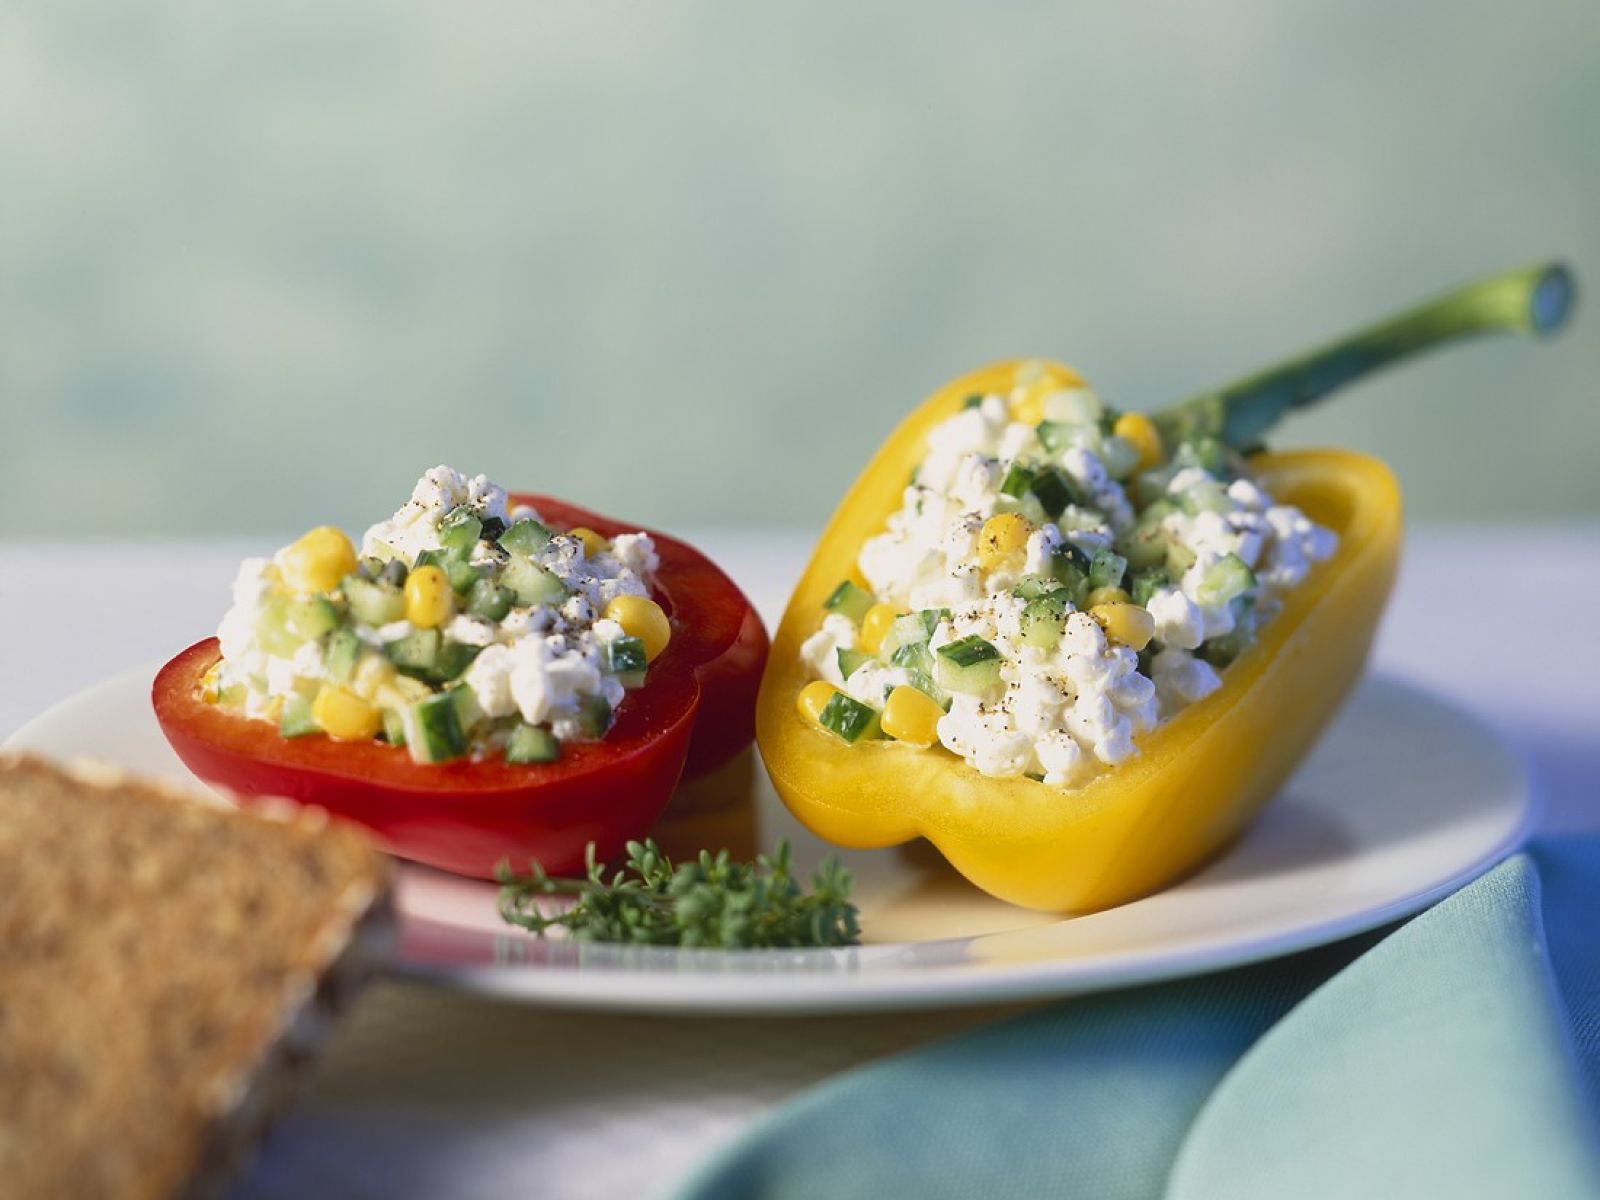 stuffed-peppers-with-cottage-cheese-and-vegetables-594342.jpg